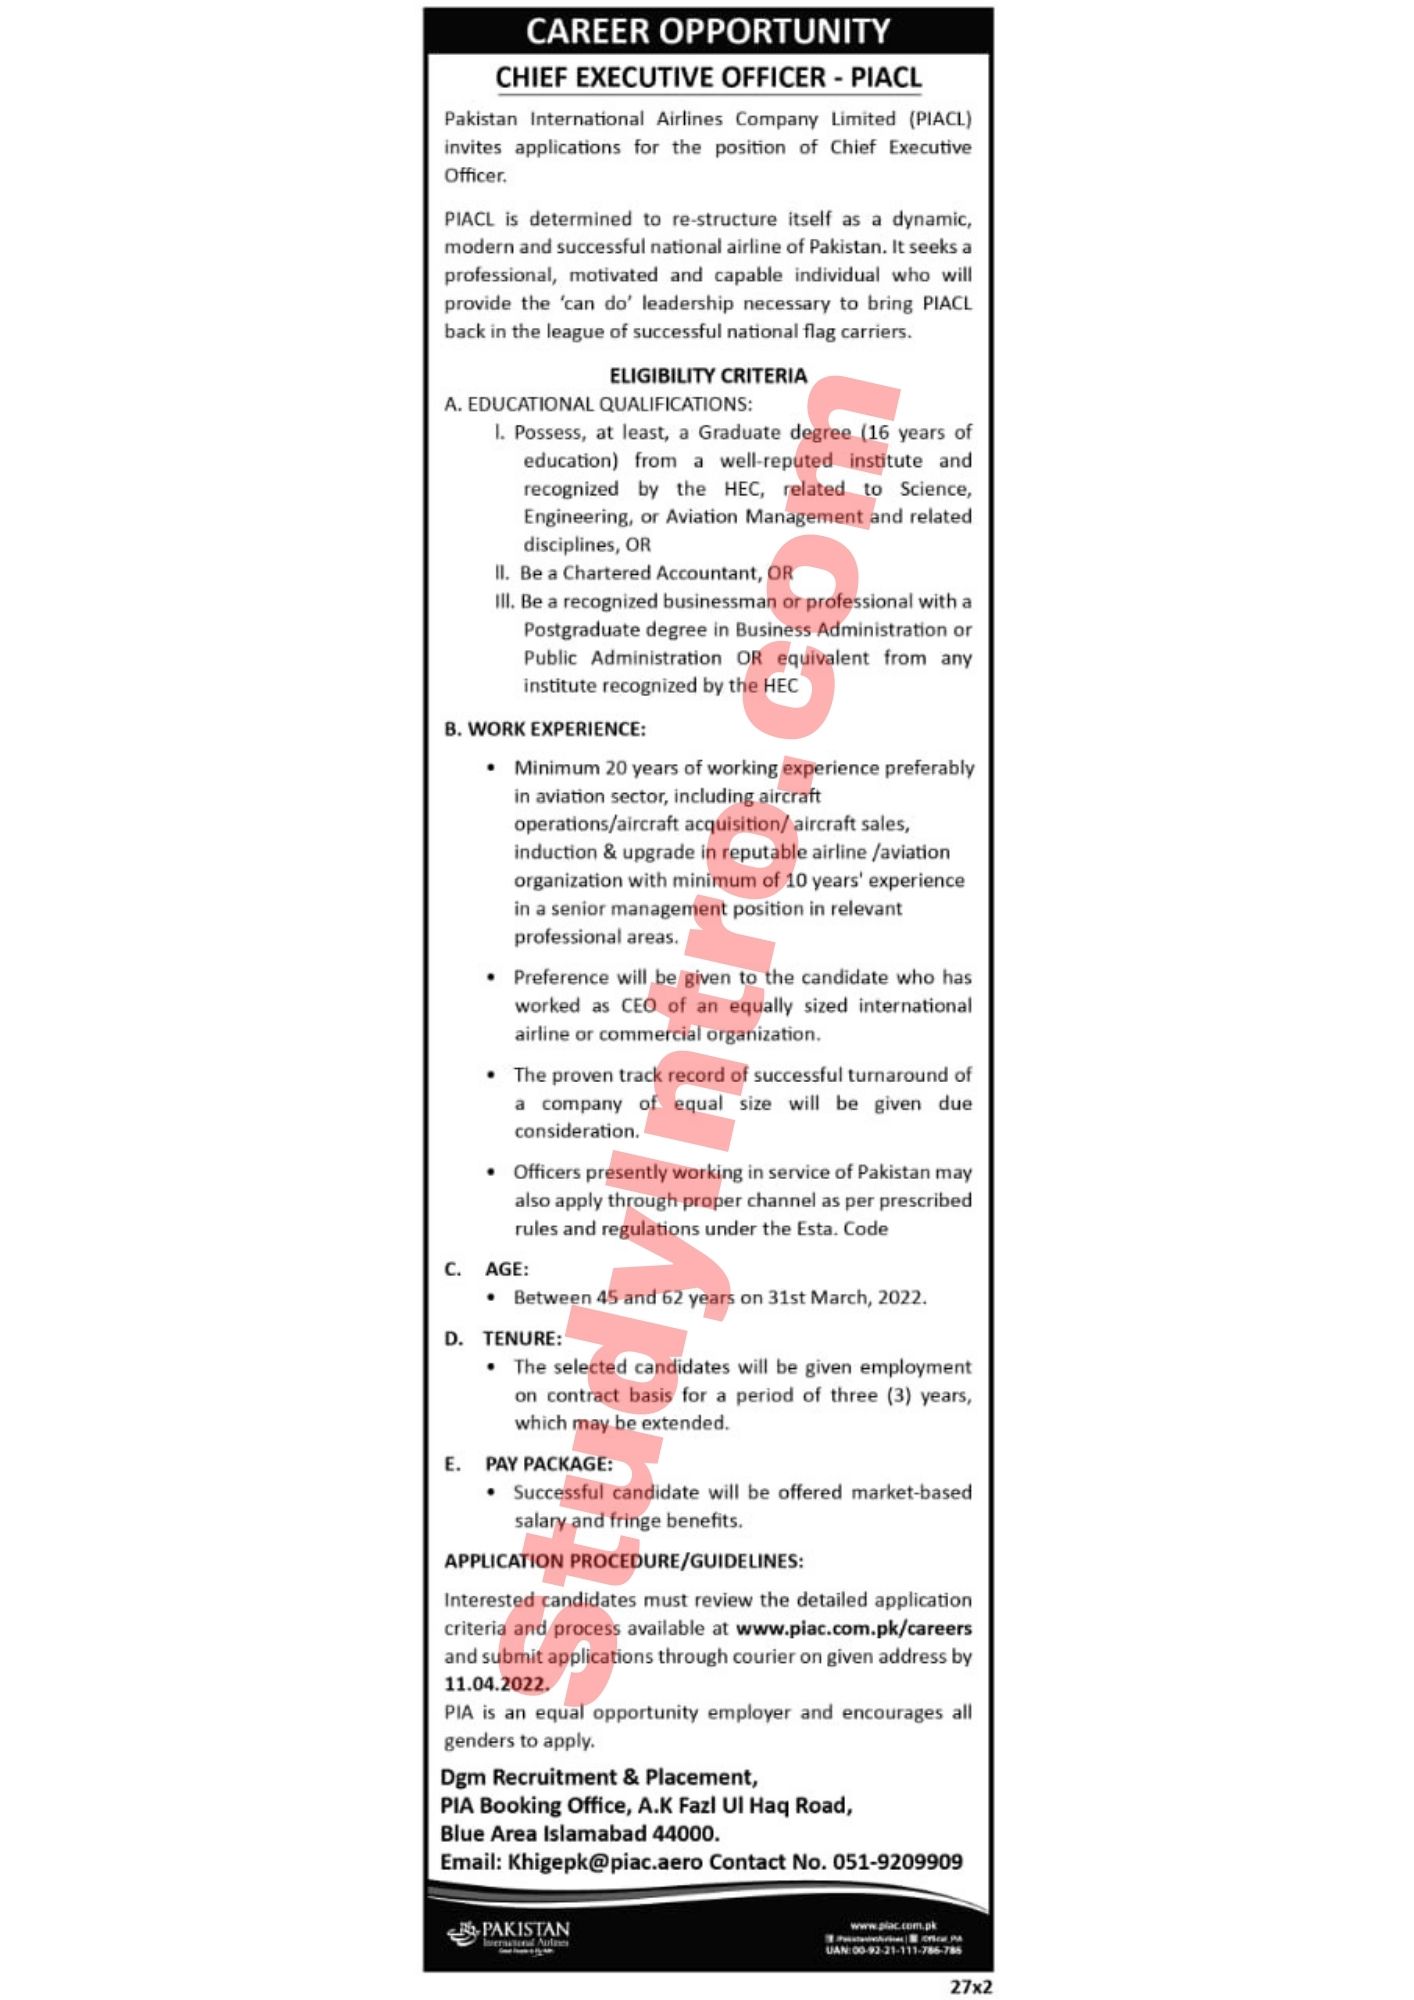 CEO Jobs in PIA 2022-Apply Now